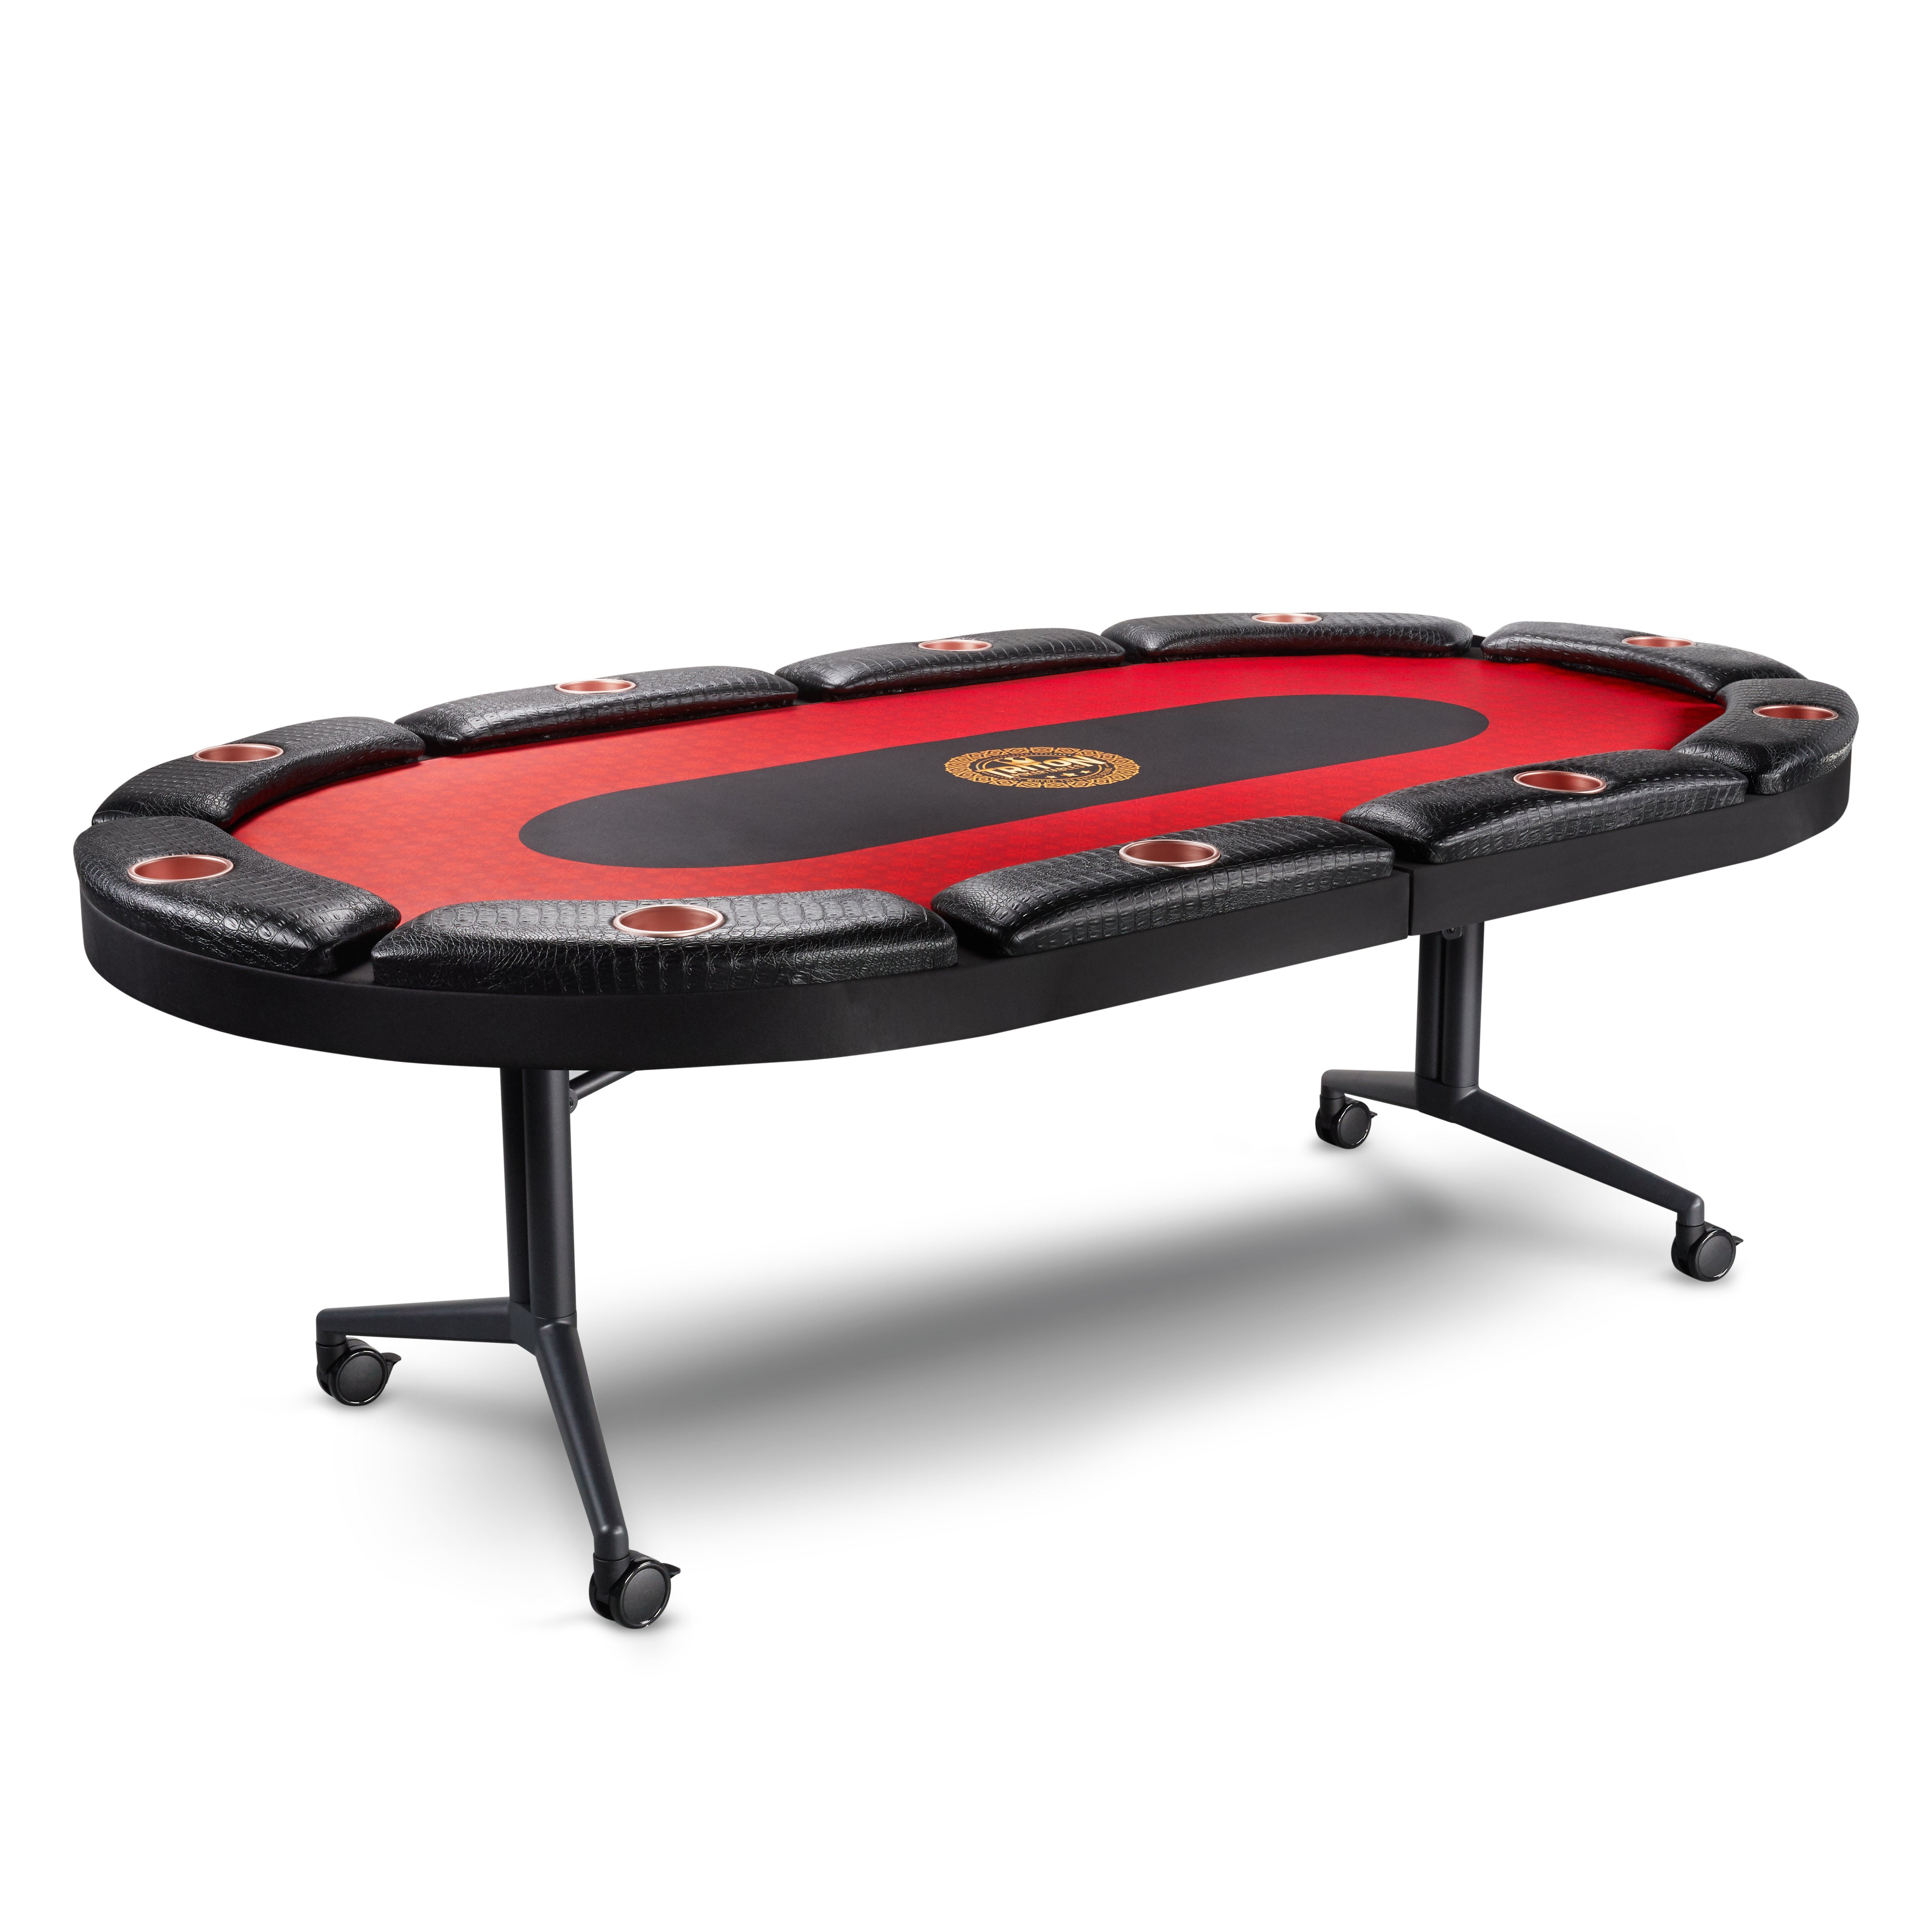 10 PLAYER POKER TABLE + 10 CHAIRS + 1 EXTRA MAT